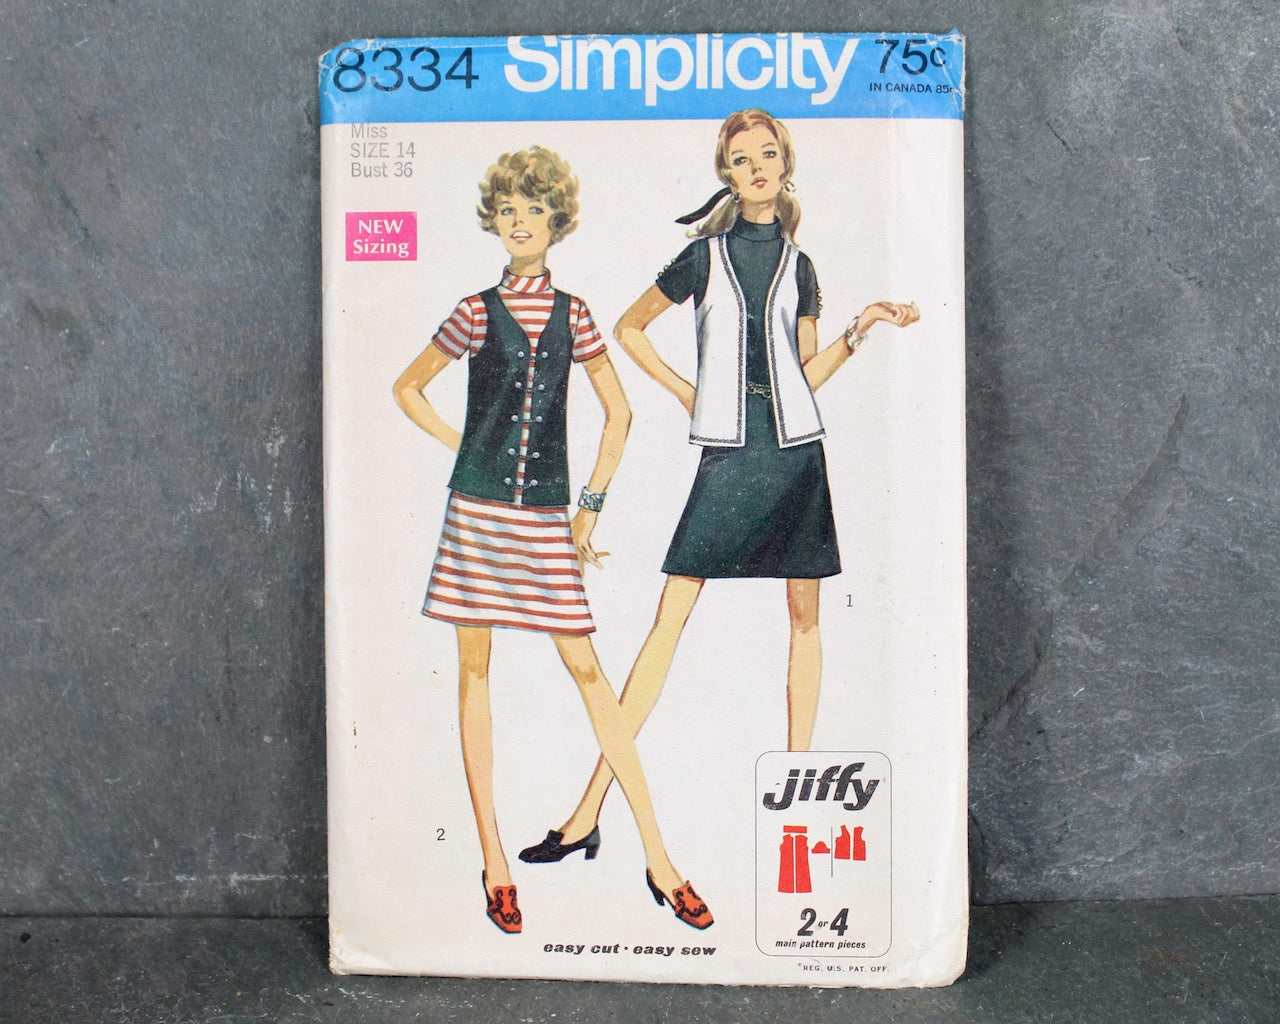 1969 Simplicity #8334 Dress Pattern | Size 14/Bust 36" | UNCUT and FACTORY FOLDED Pattern in Original Envelope